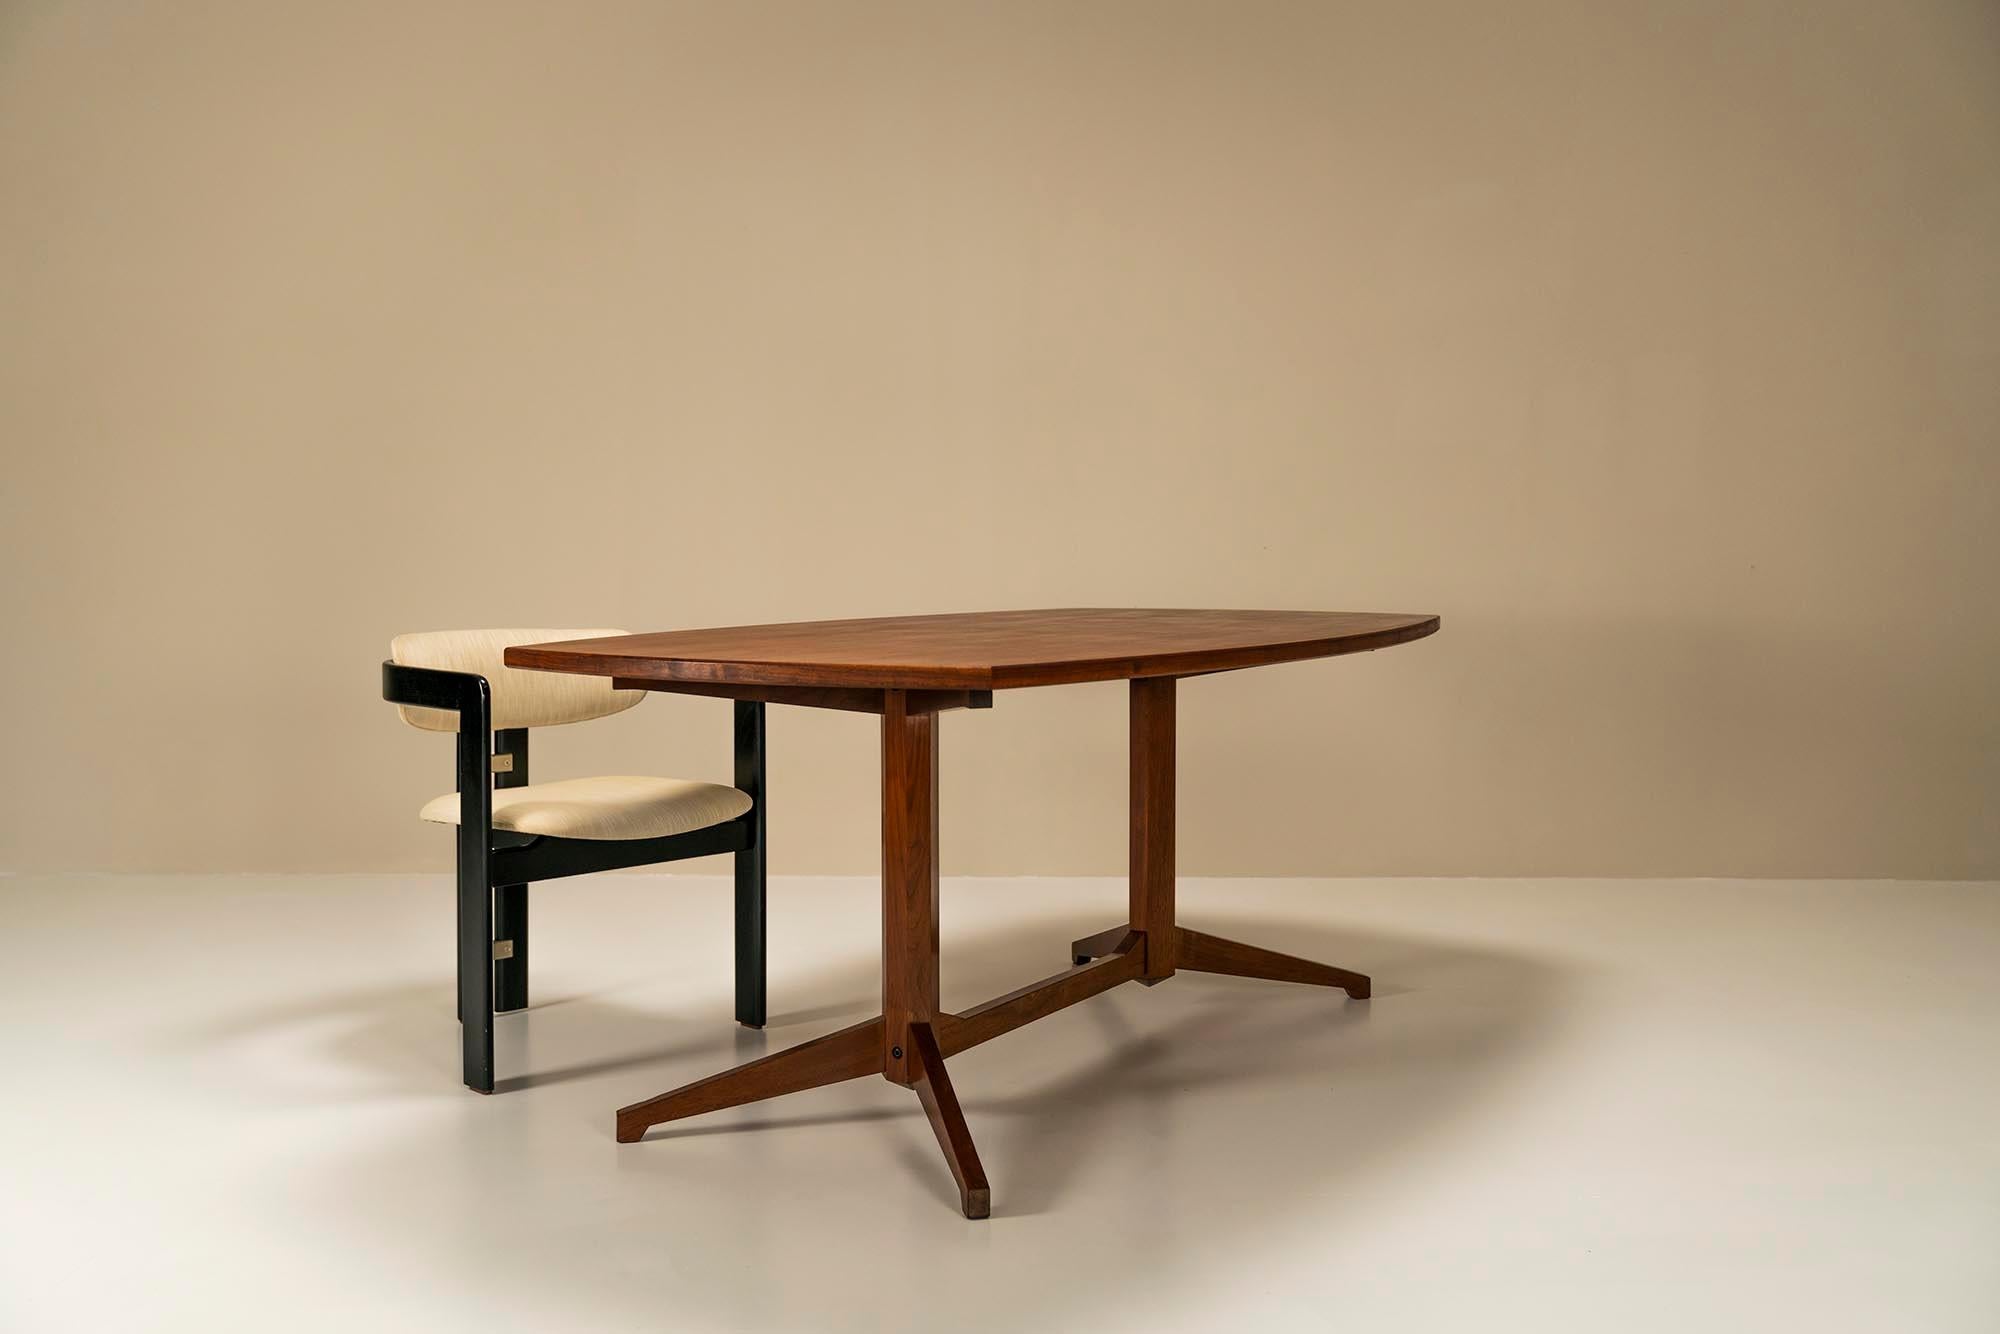 Mid-20th Century Dining Table, Model TL22, in Mahogany by Albini & Helg for Poggi, Italy 1958 For Sale